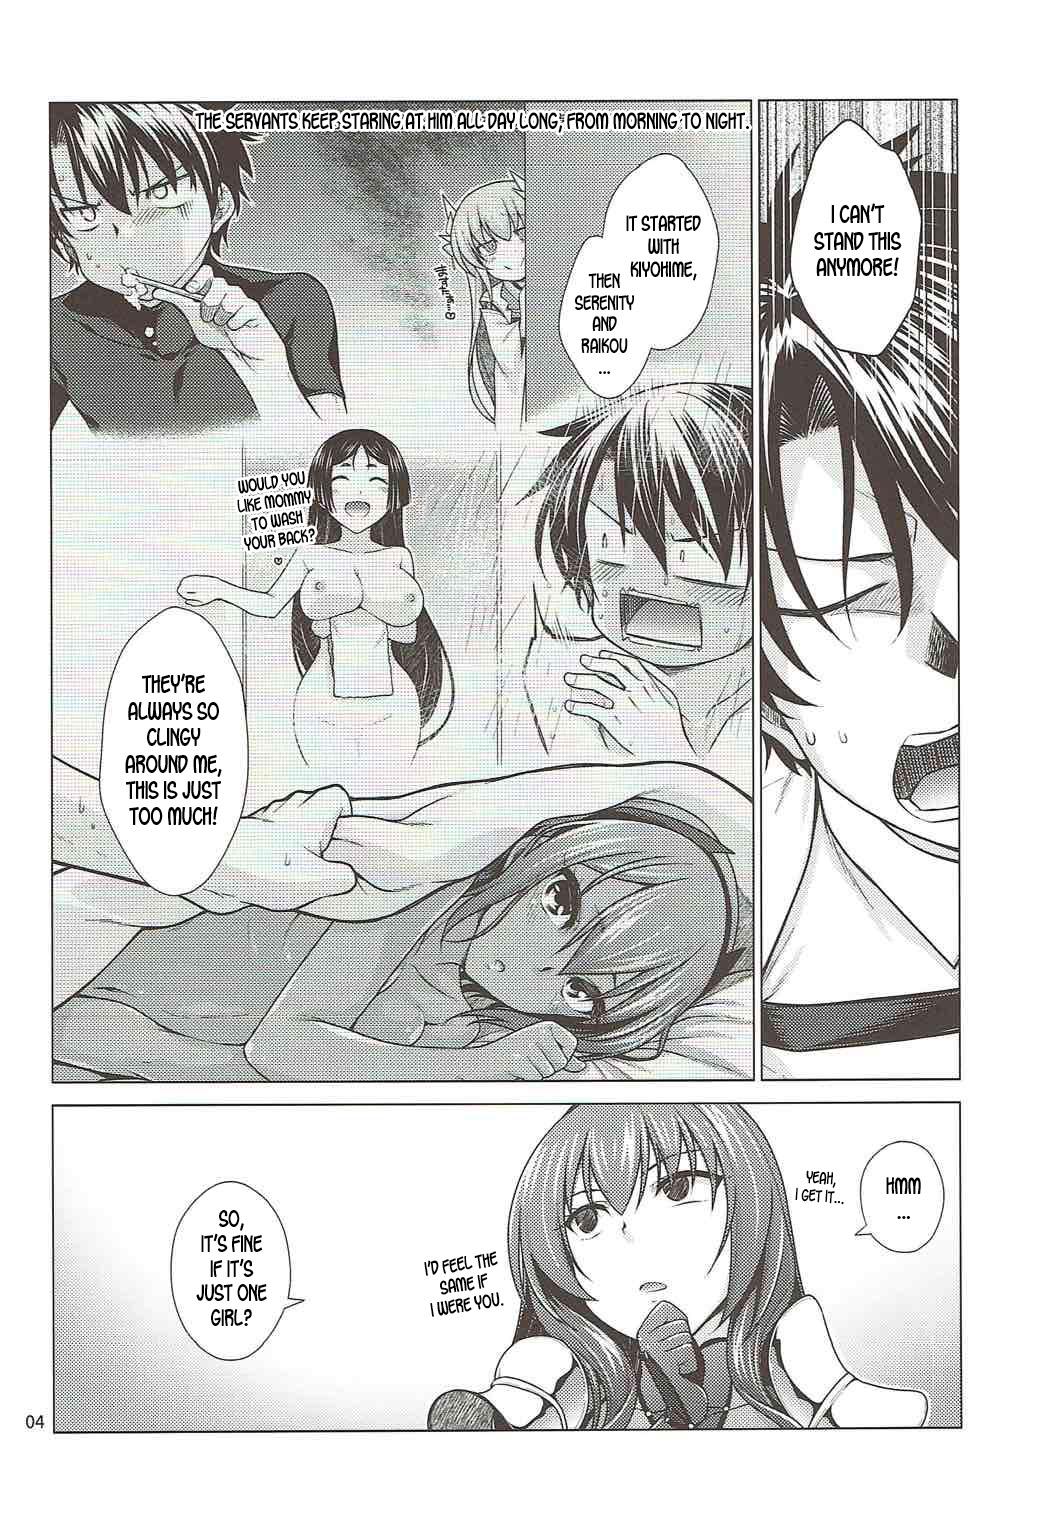 Babes Scathach Shishou to Celt Shiki Gachihamex! - Fate grand order Curves - Page 3